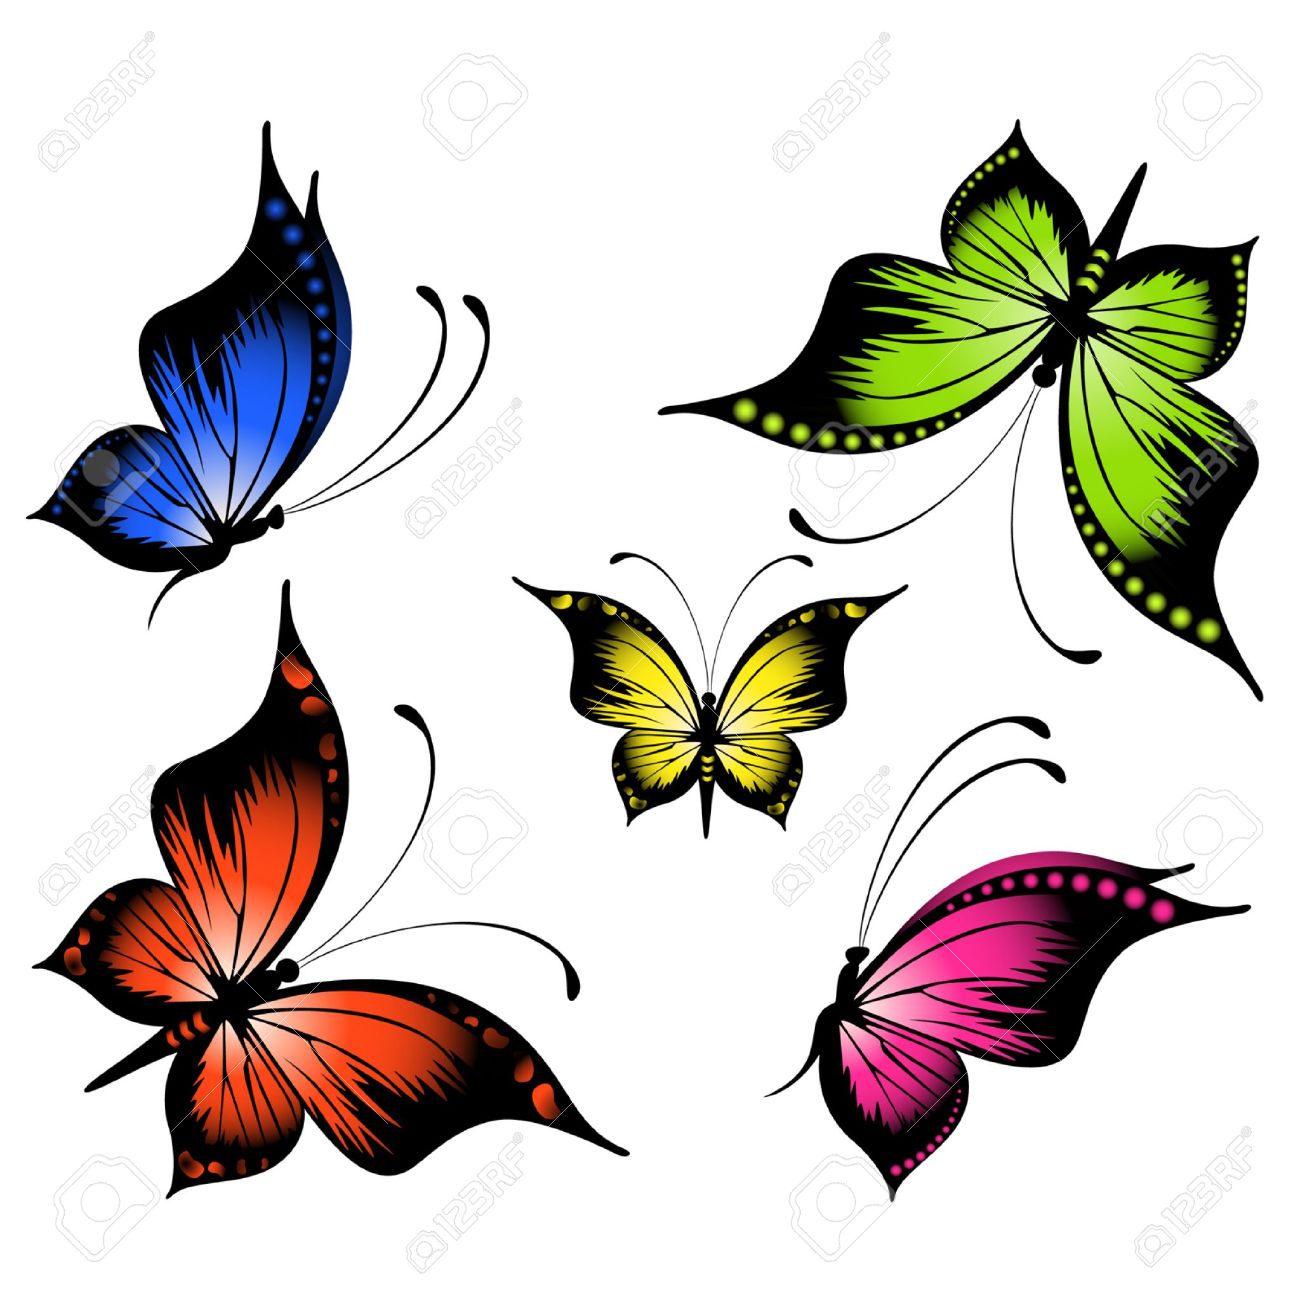 Tropical Butterfly Clipart.